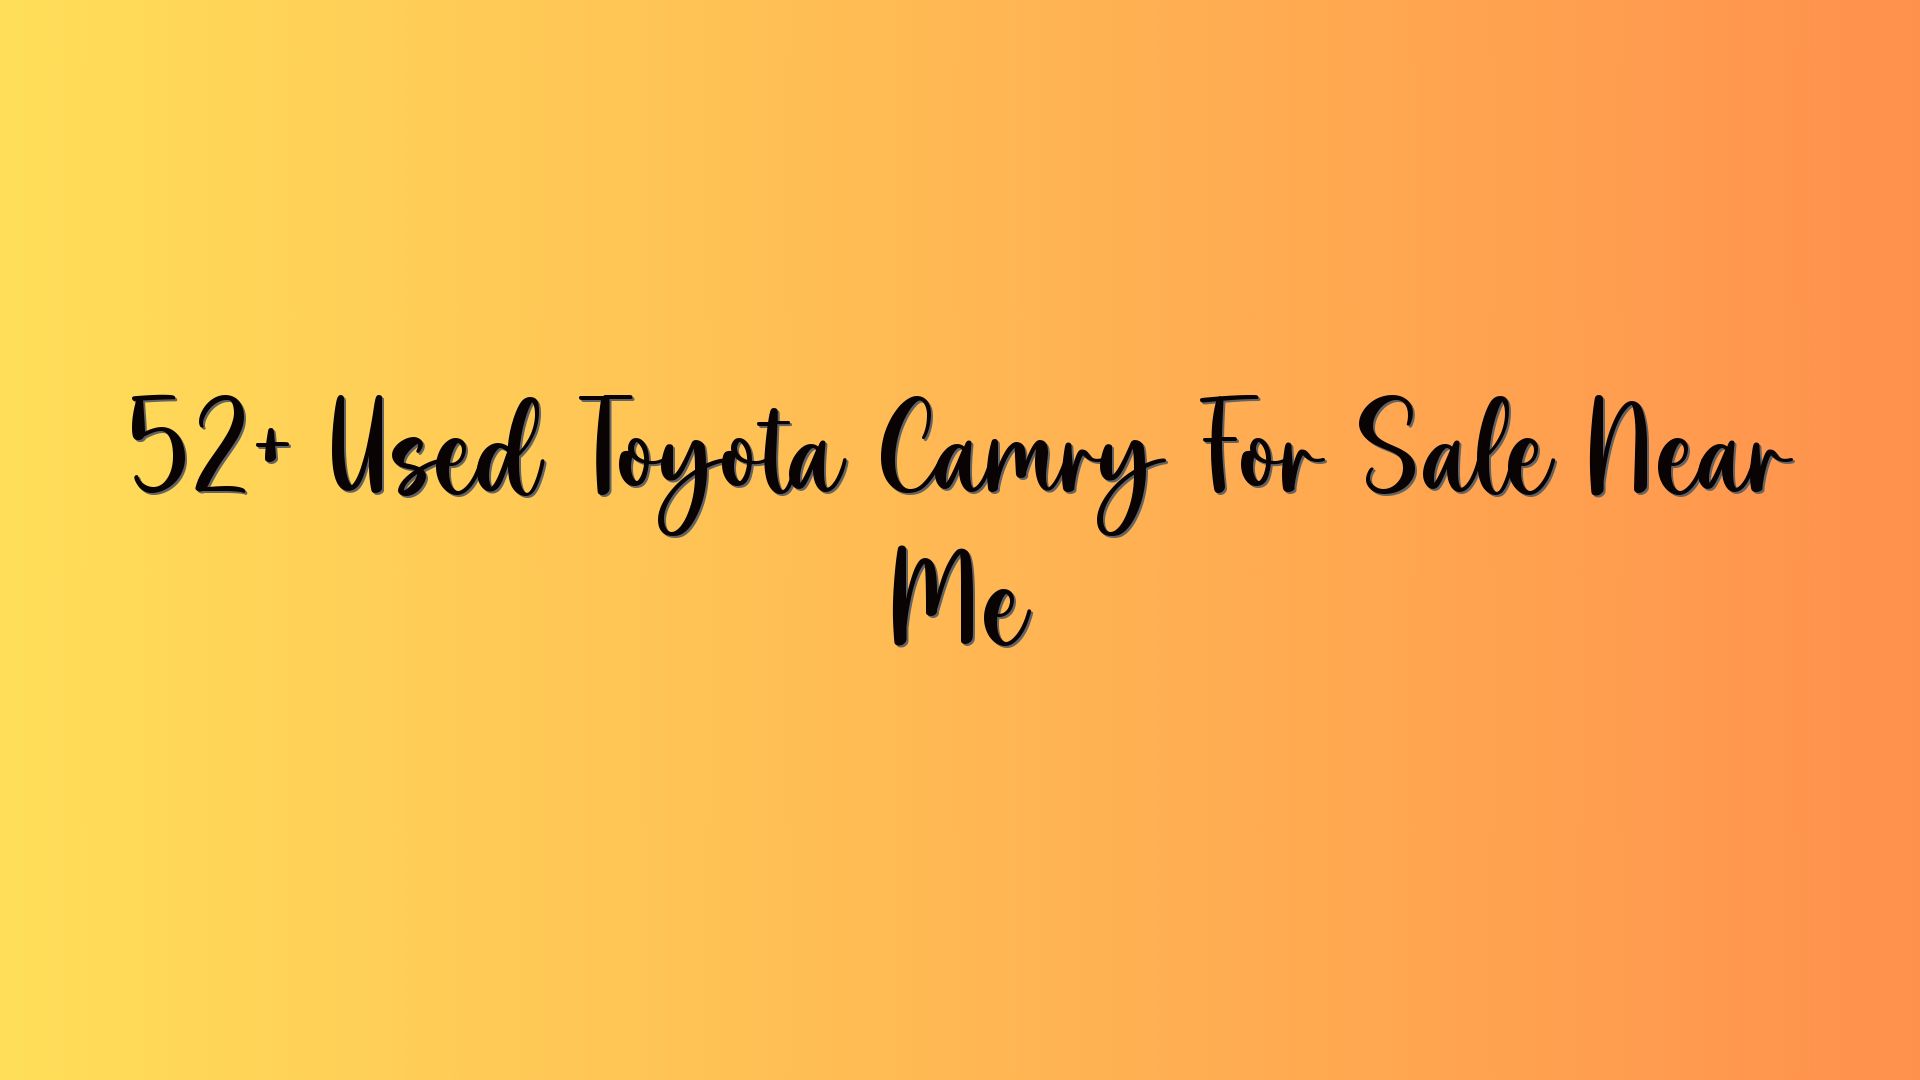 52+ Used Toyota Camry For Sale Near Me